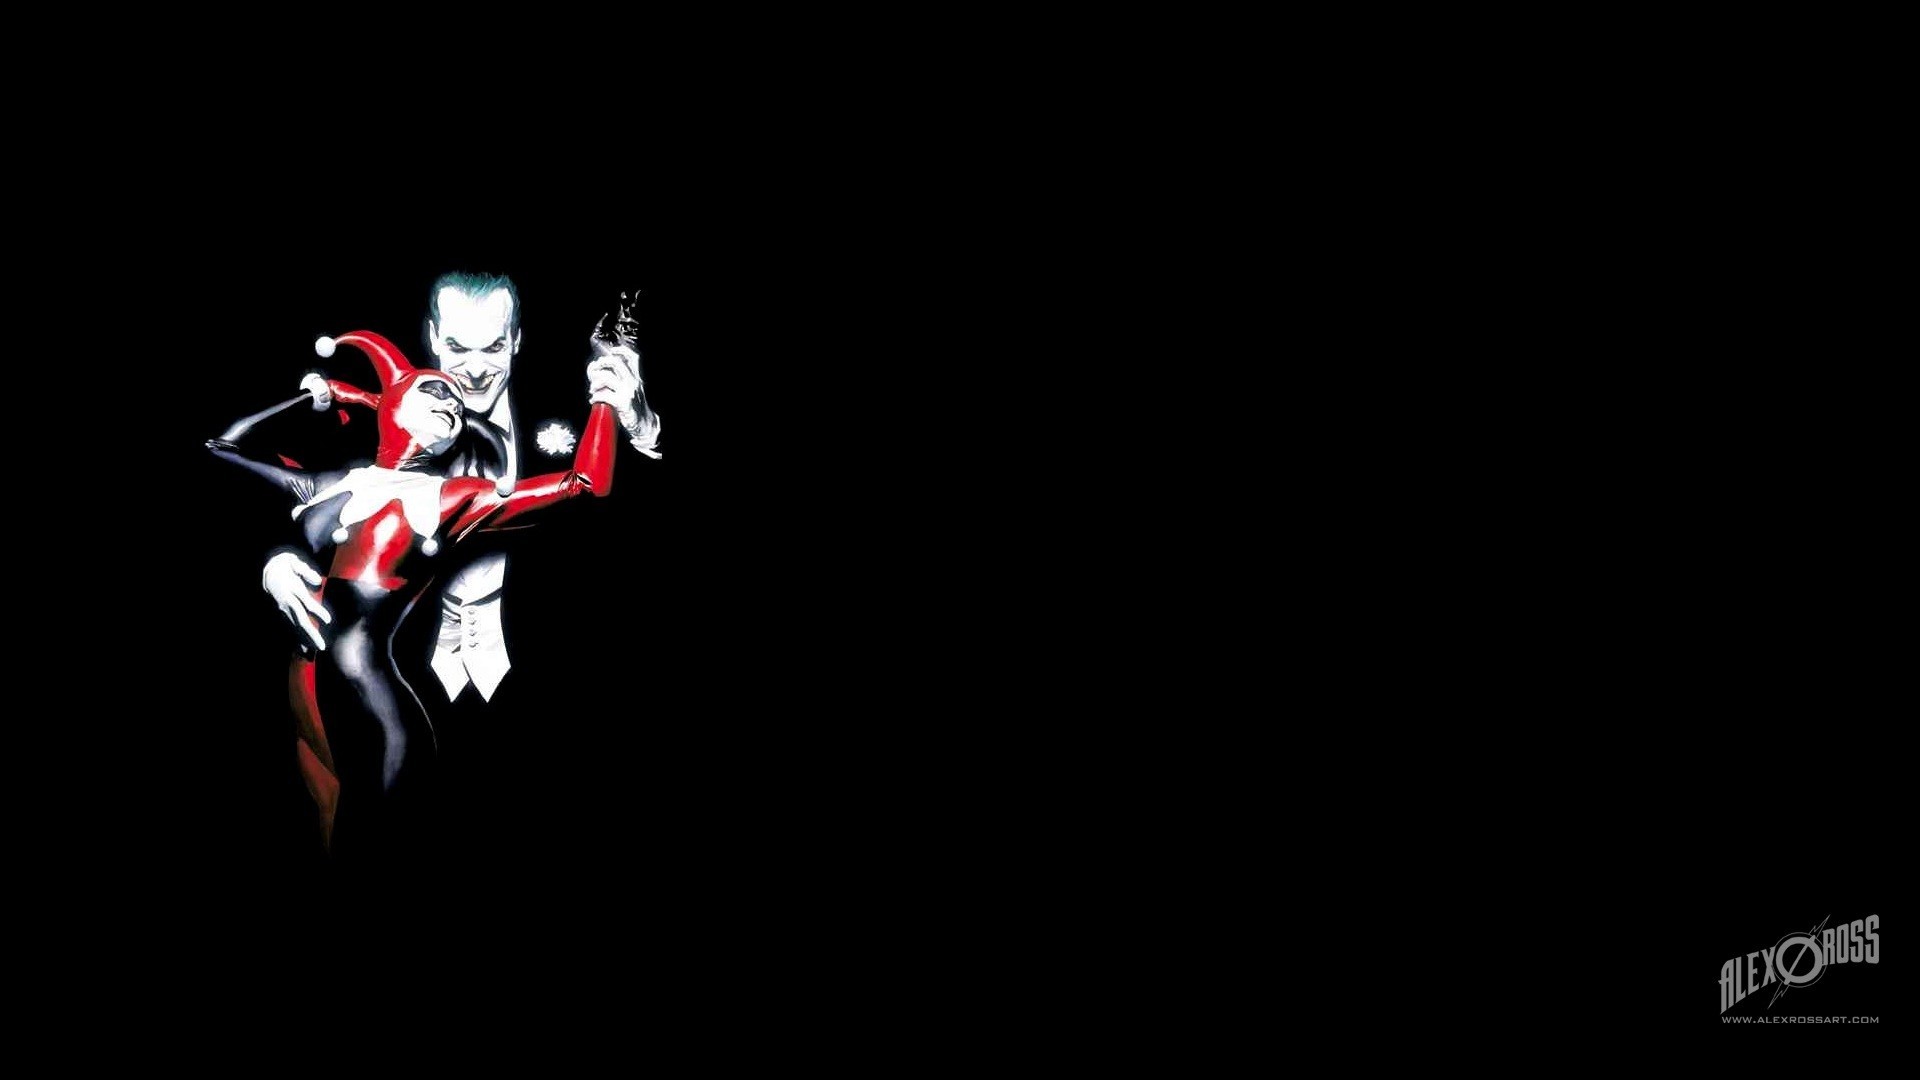 130 Suicide Squad Hd Wallpapers - Harley Quinn Hd Wallpaper Suicide Squad Desktop - HD Wallpaper 